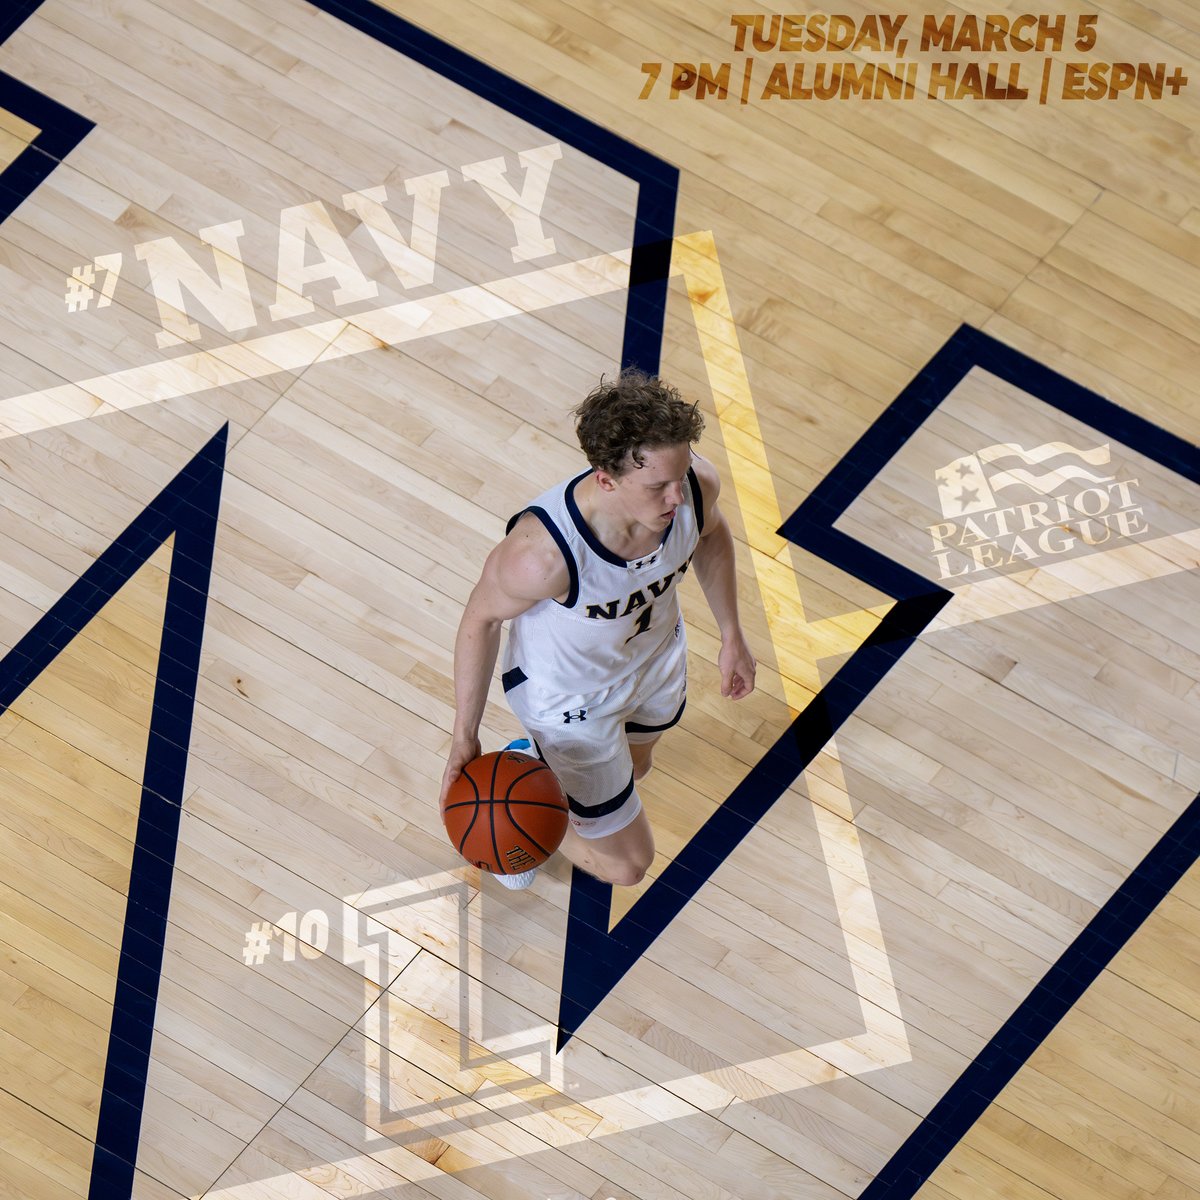 The matchup is set! We've got an in-state showdown in Alumni Hall on Tuesday! 🎟️navysports.evenue.net/event/B2023/PL… #GoNavy